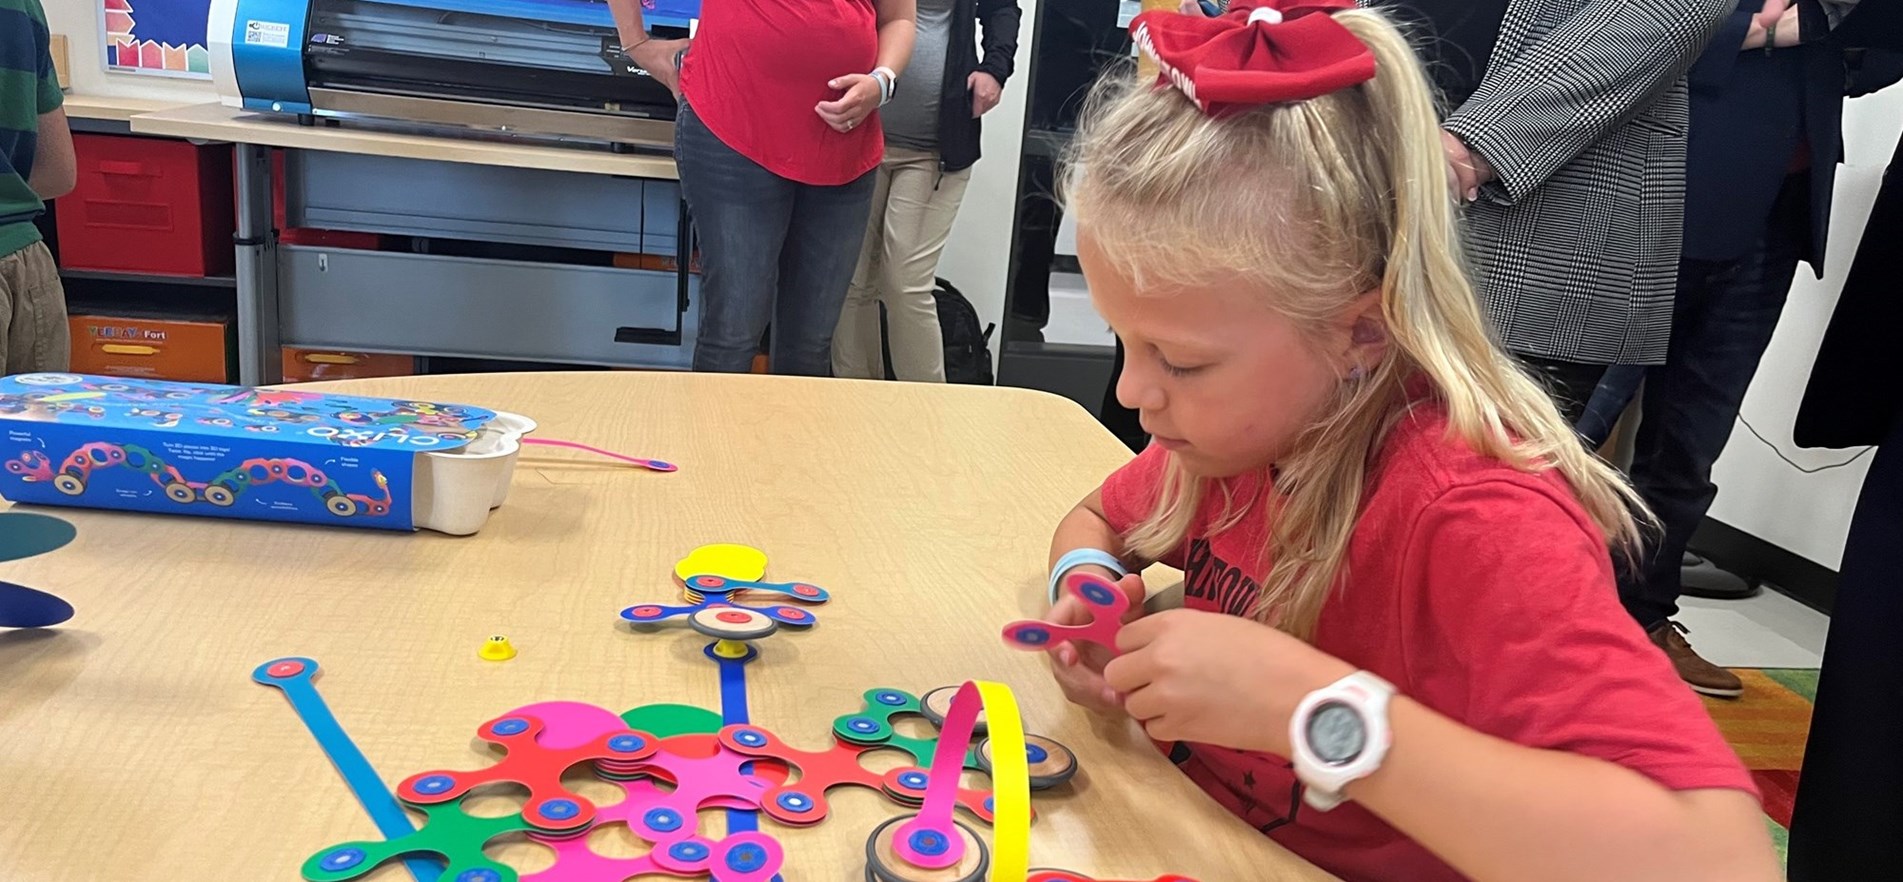 Elementary student in red shirt with red bow practicing STEAM exercise with craft parts at a table.